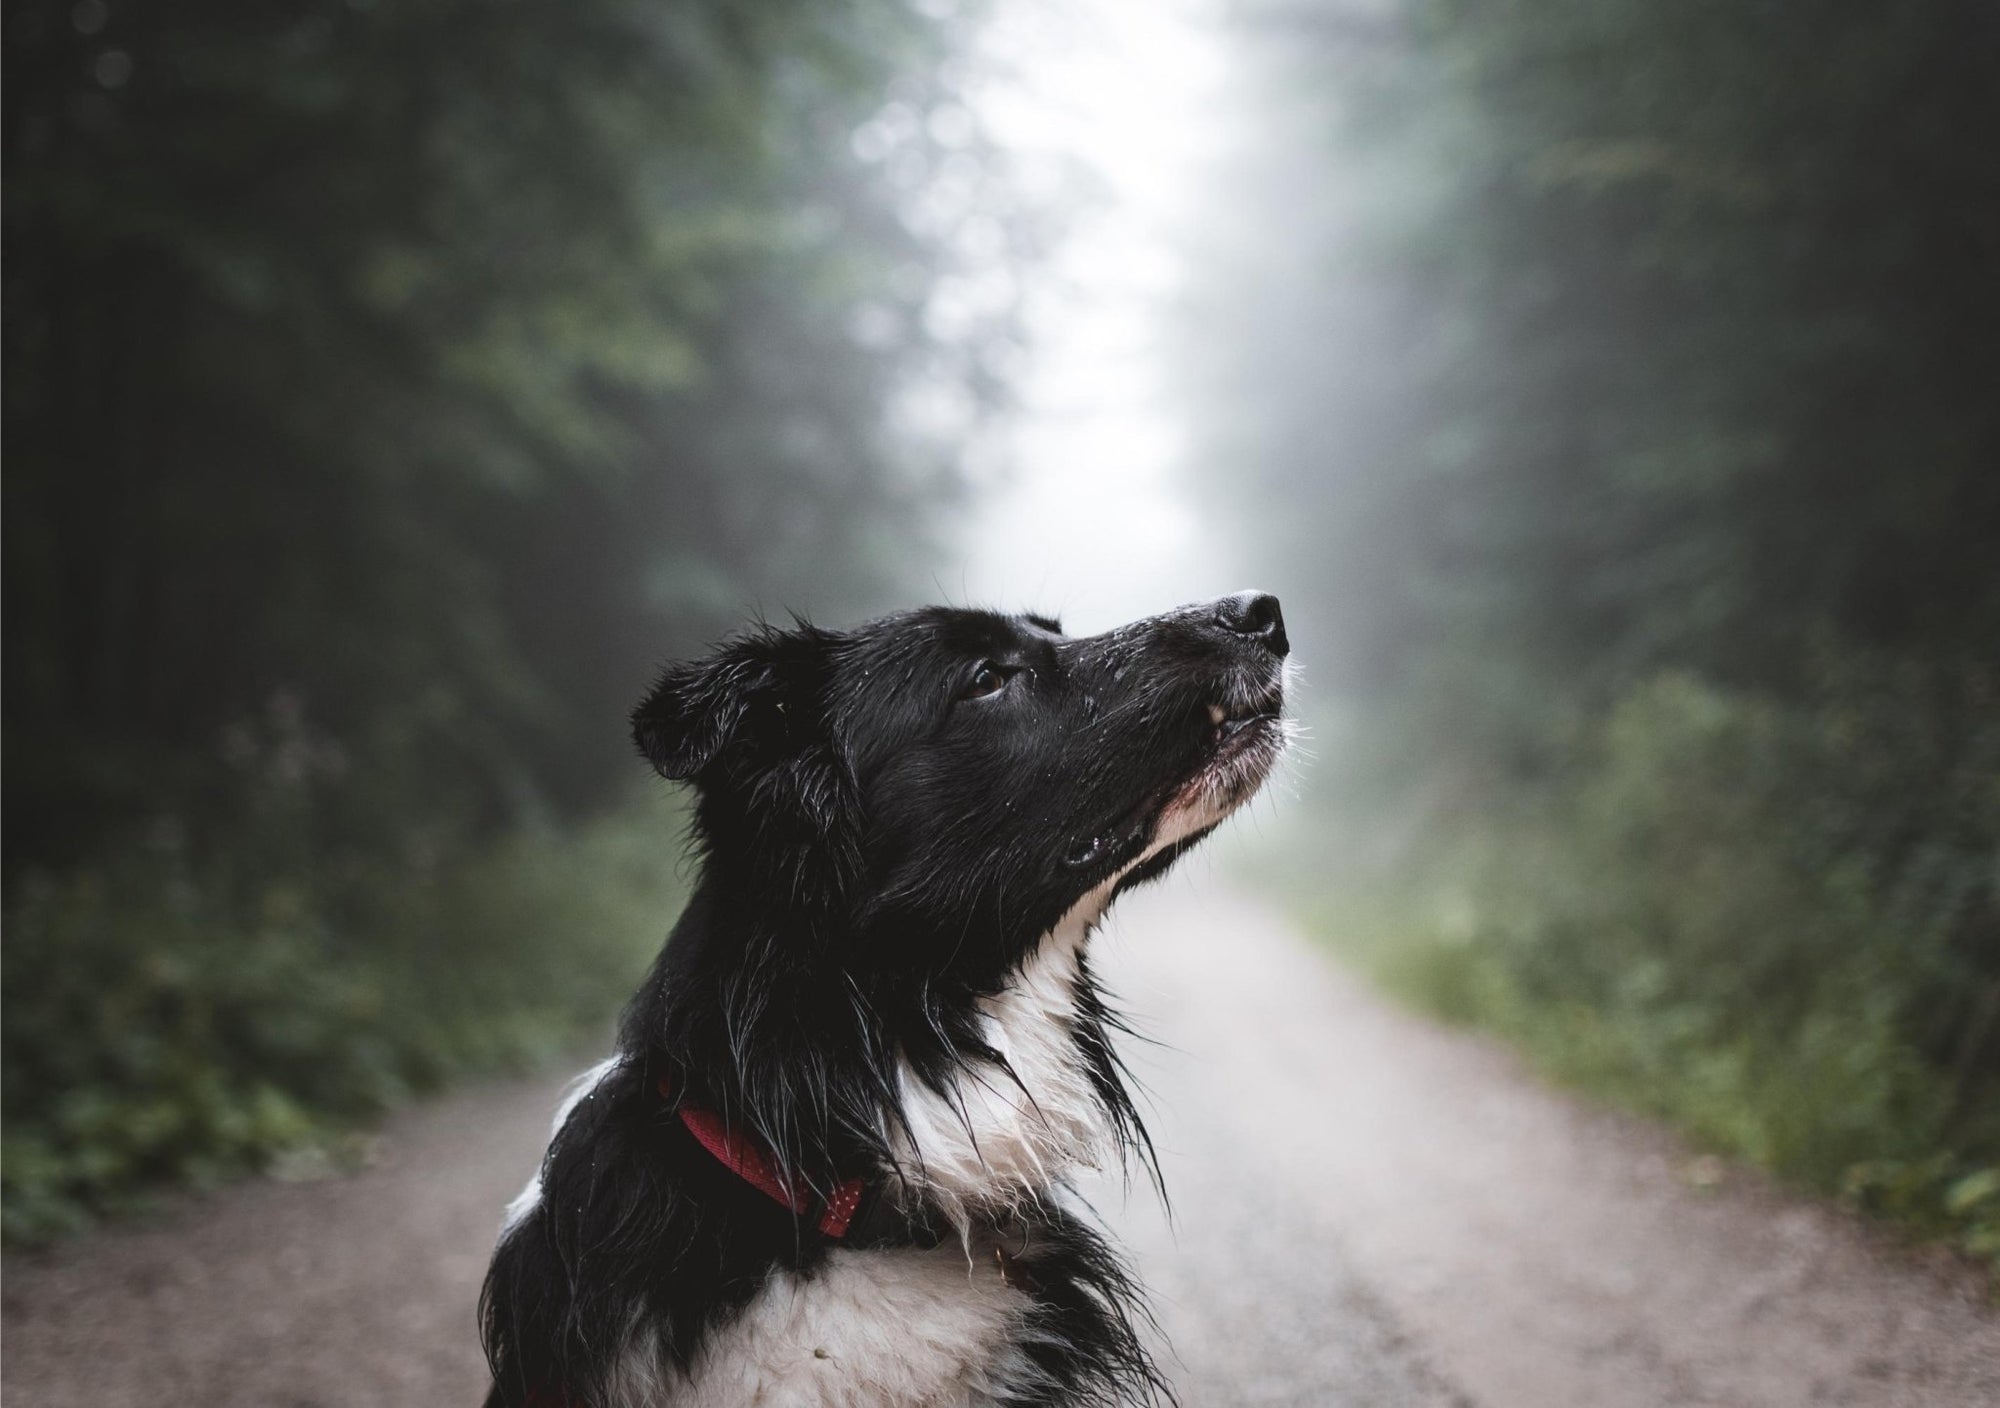 Ensuring Your Dog's Well-Being During Foggy Conditions